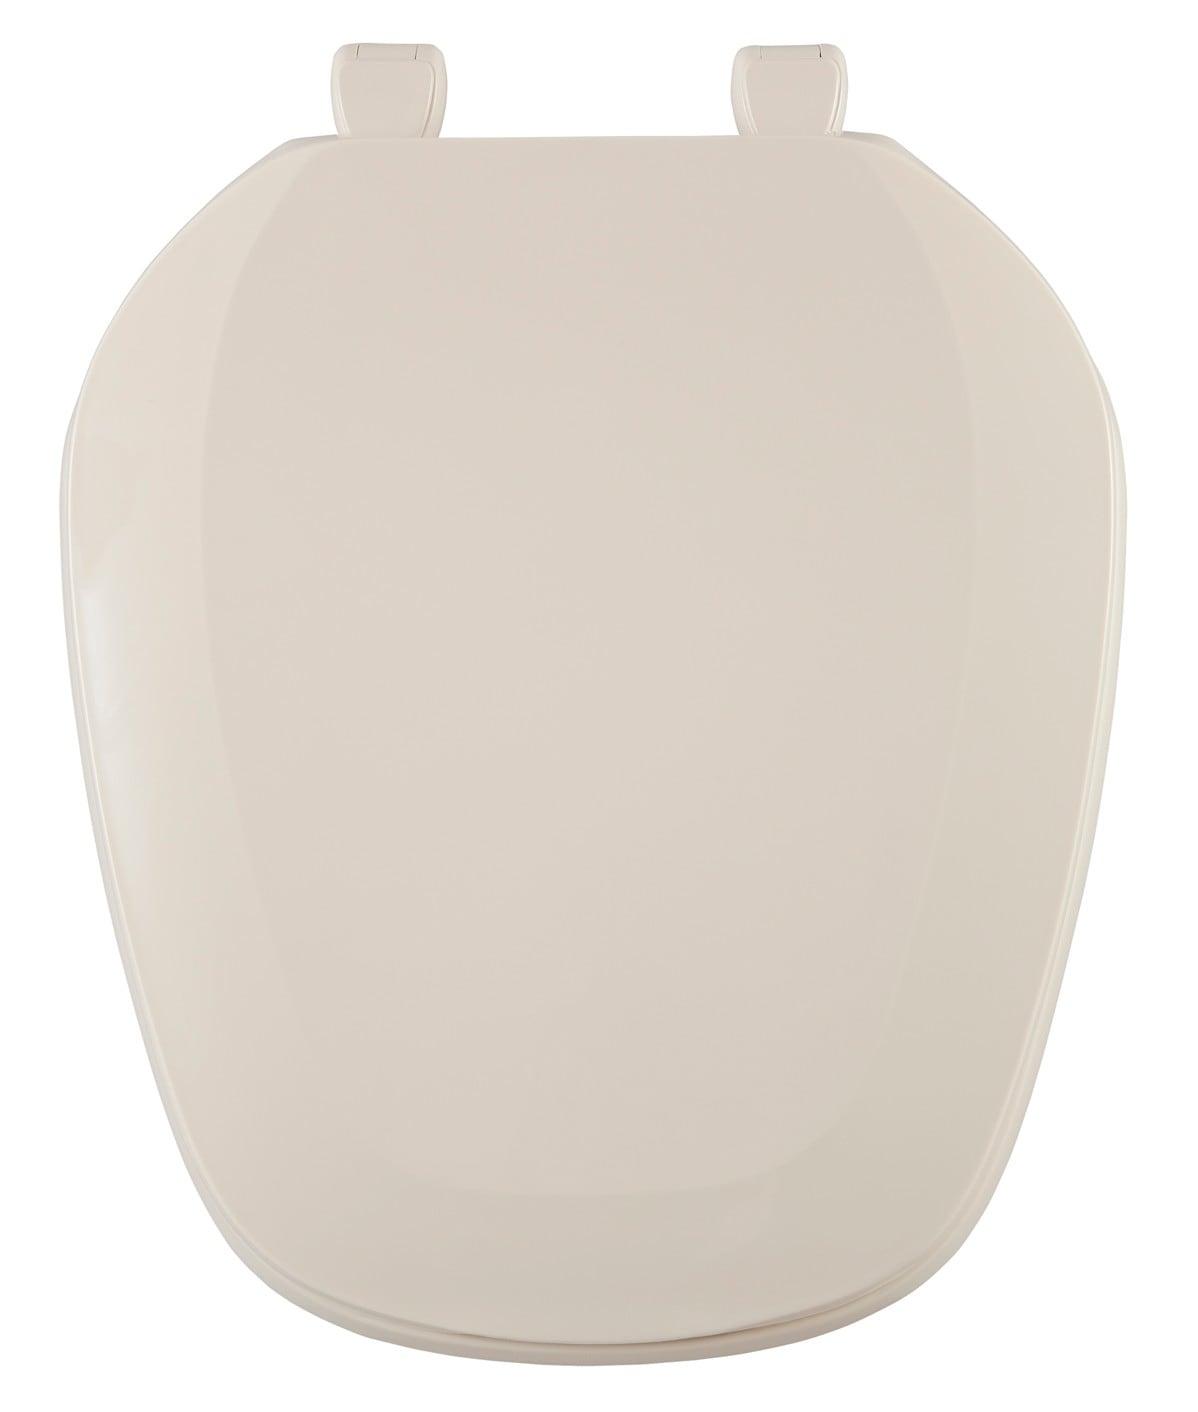 Eljer Emblem Round Closed Square Front Toilet Seat in White 